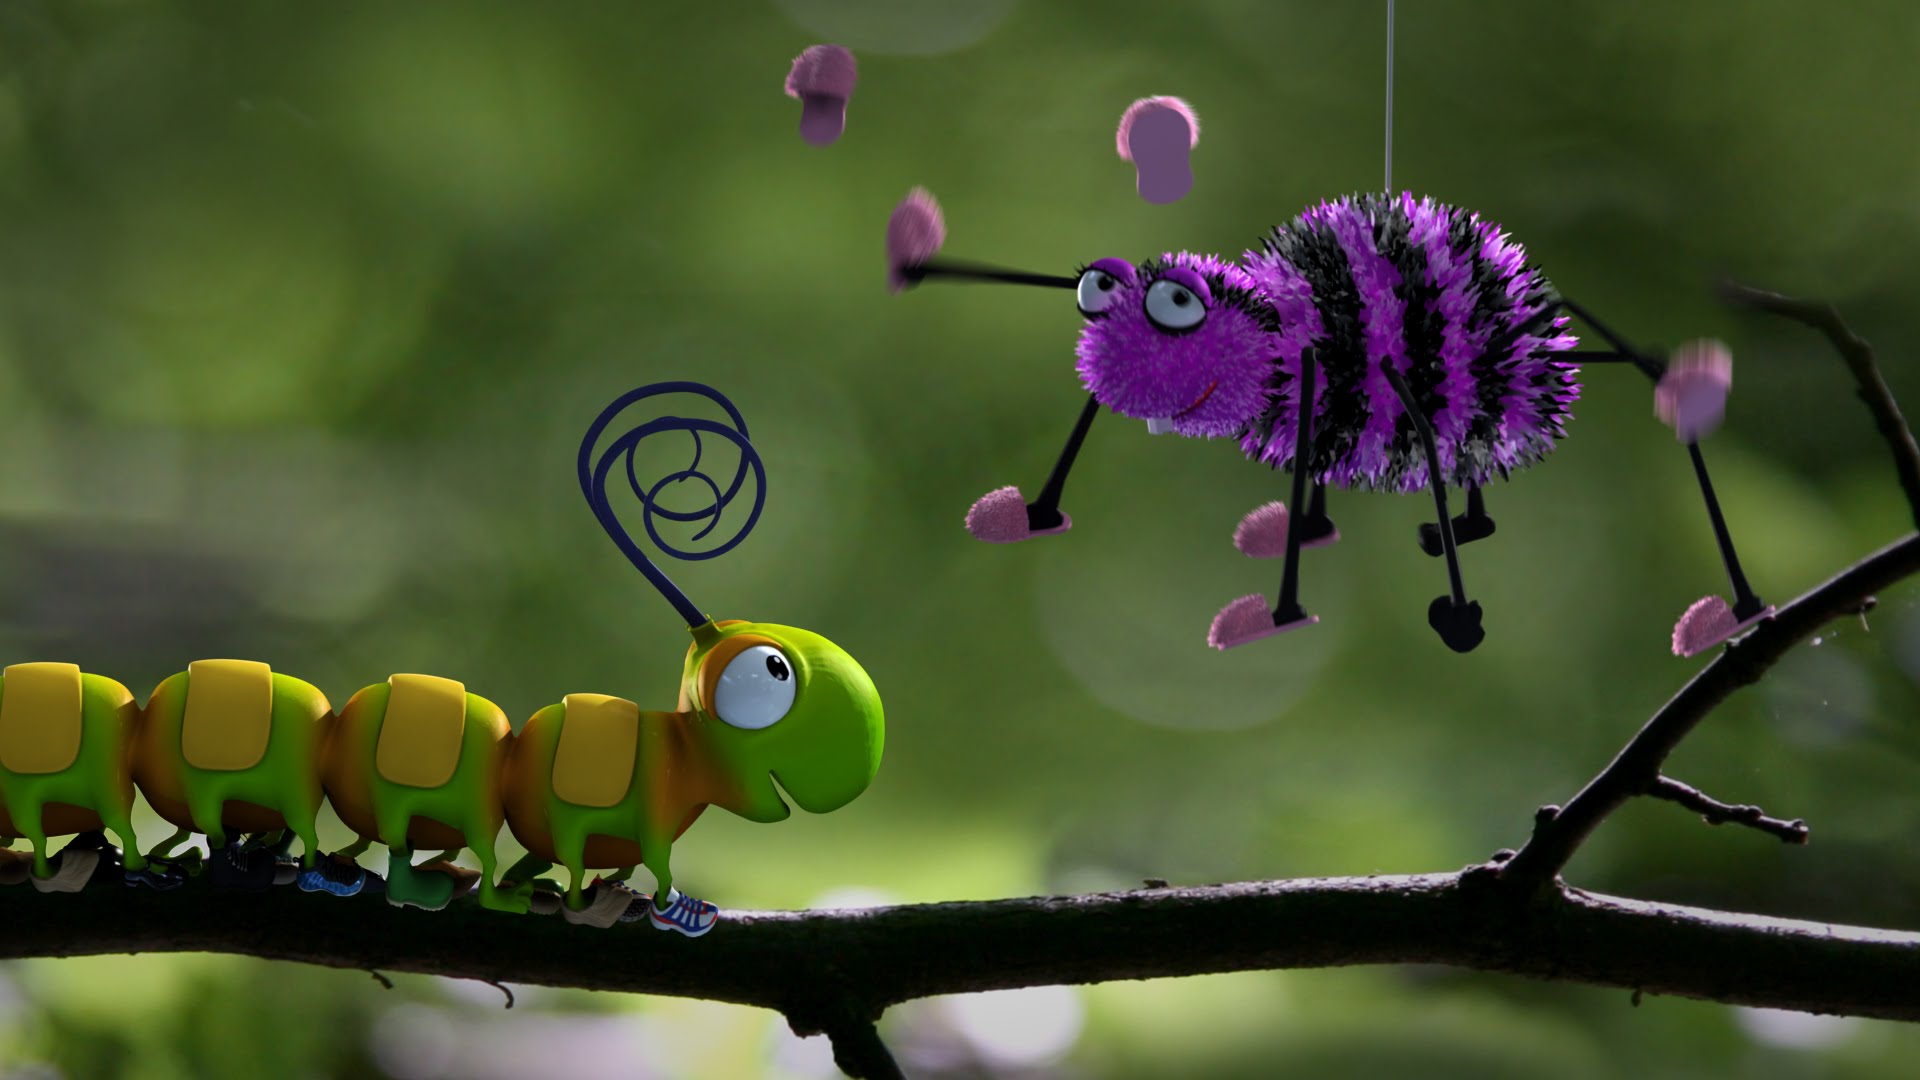 Caterpillar Shoes - Fun Insect Animation - Kids' Bedtime Story - Nursery Rhyme